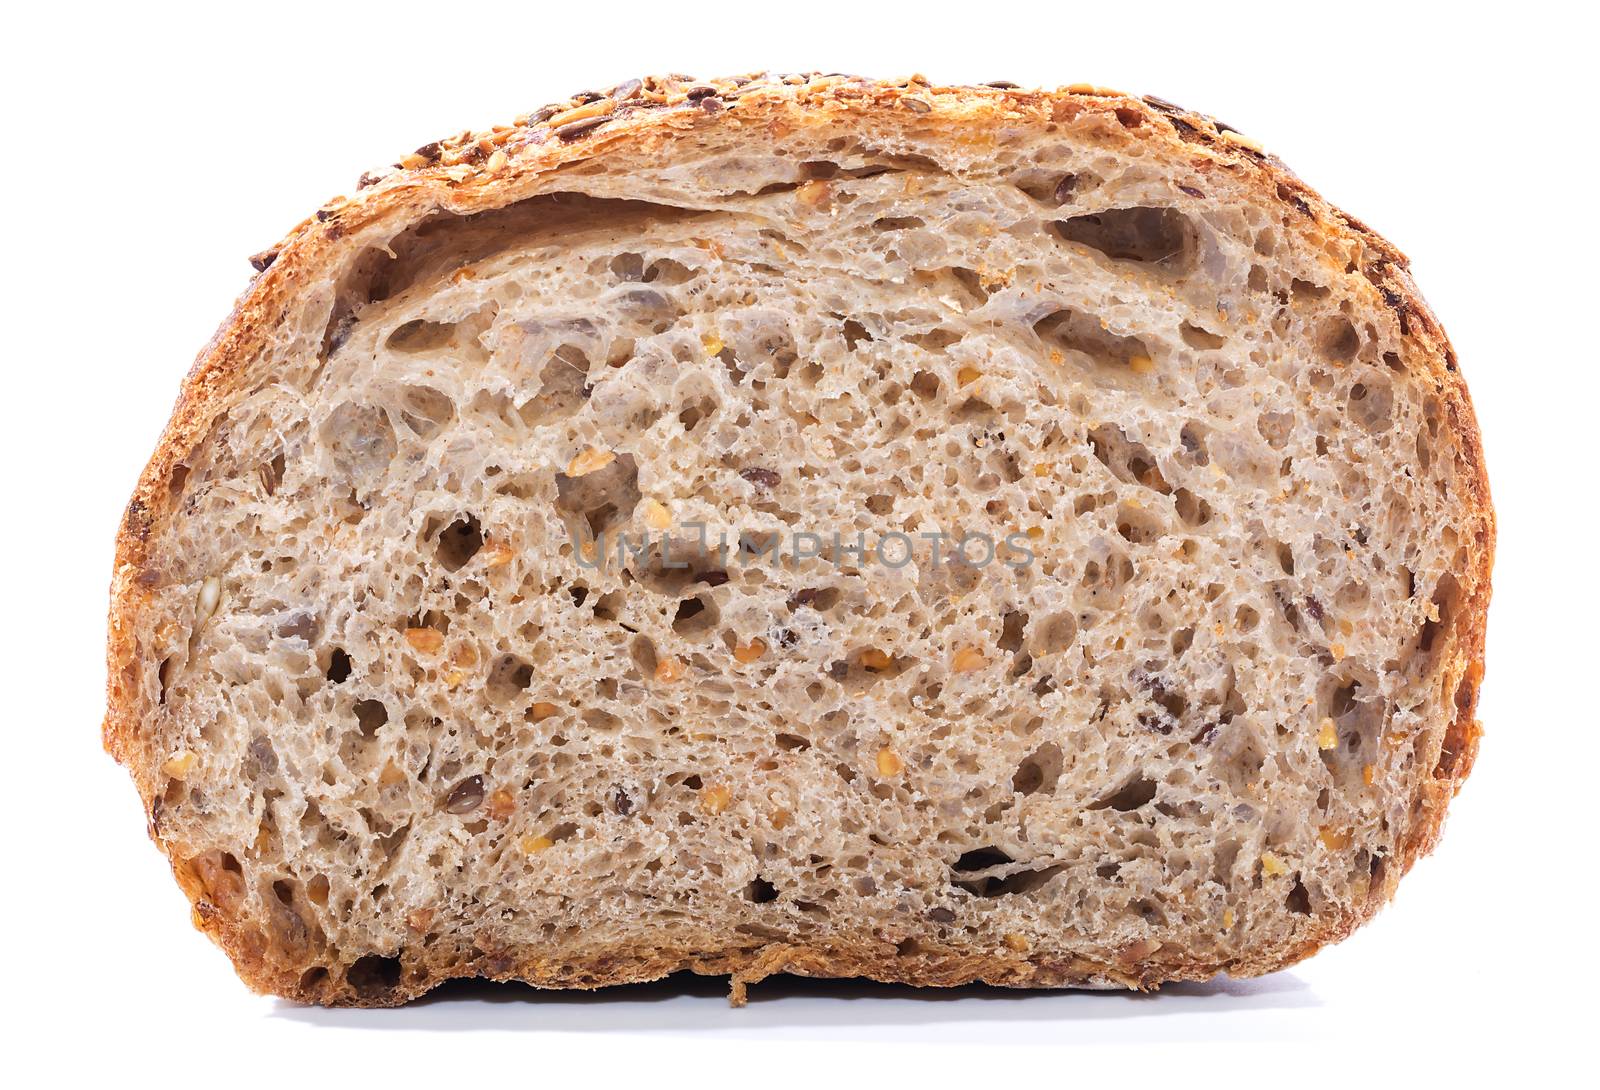 Whole grain bread Loaf by milinz